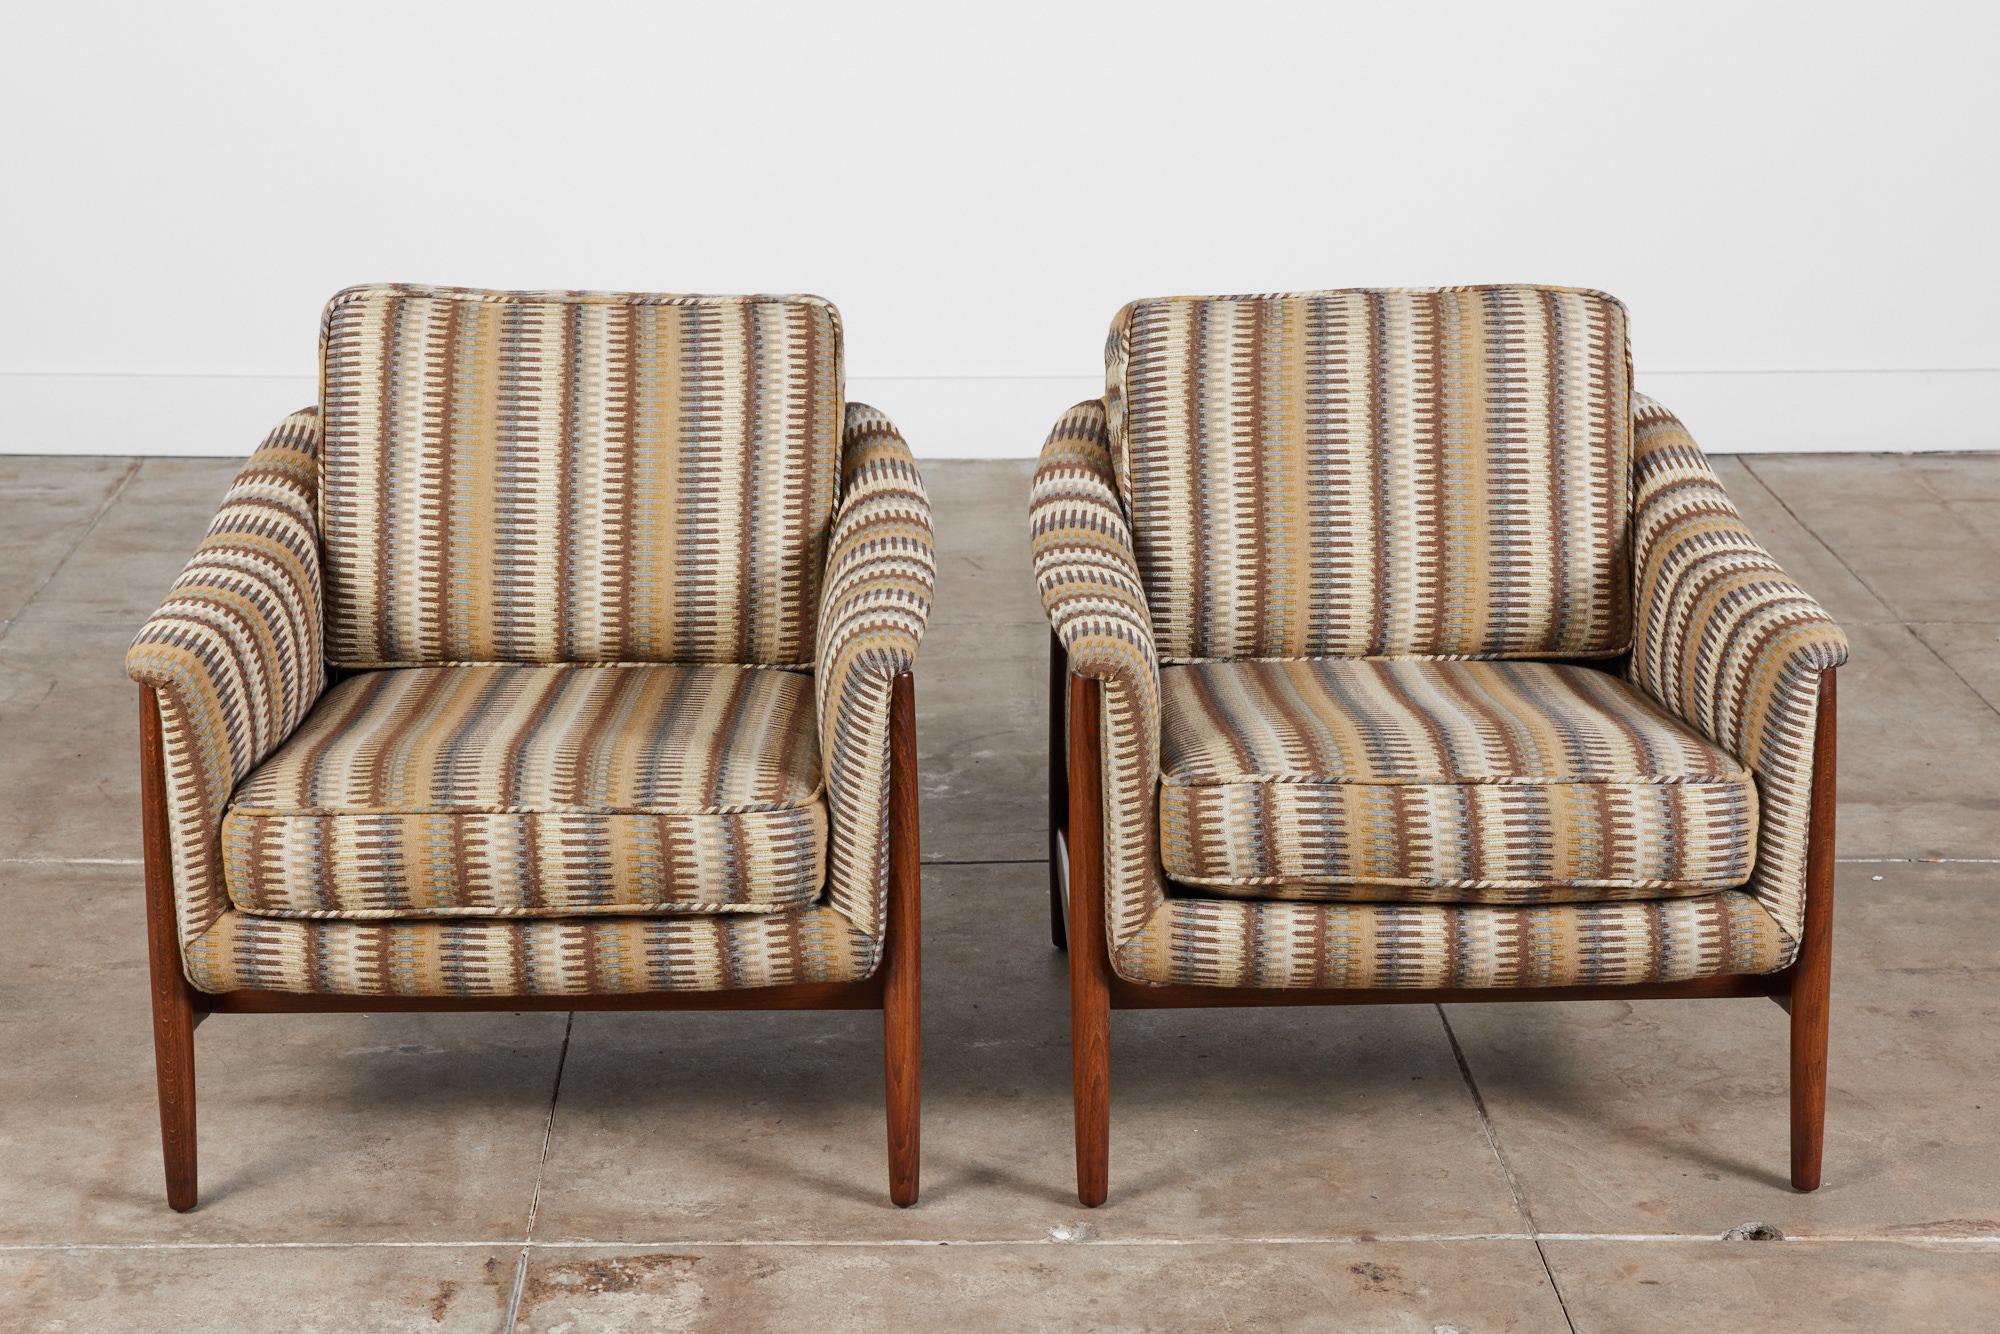 20th Century Pair of Folke Ohlsson Lounge Chairs for DUX